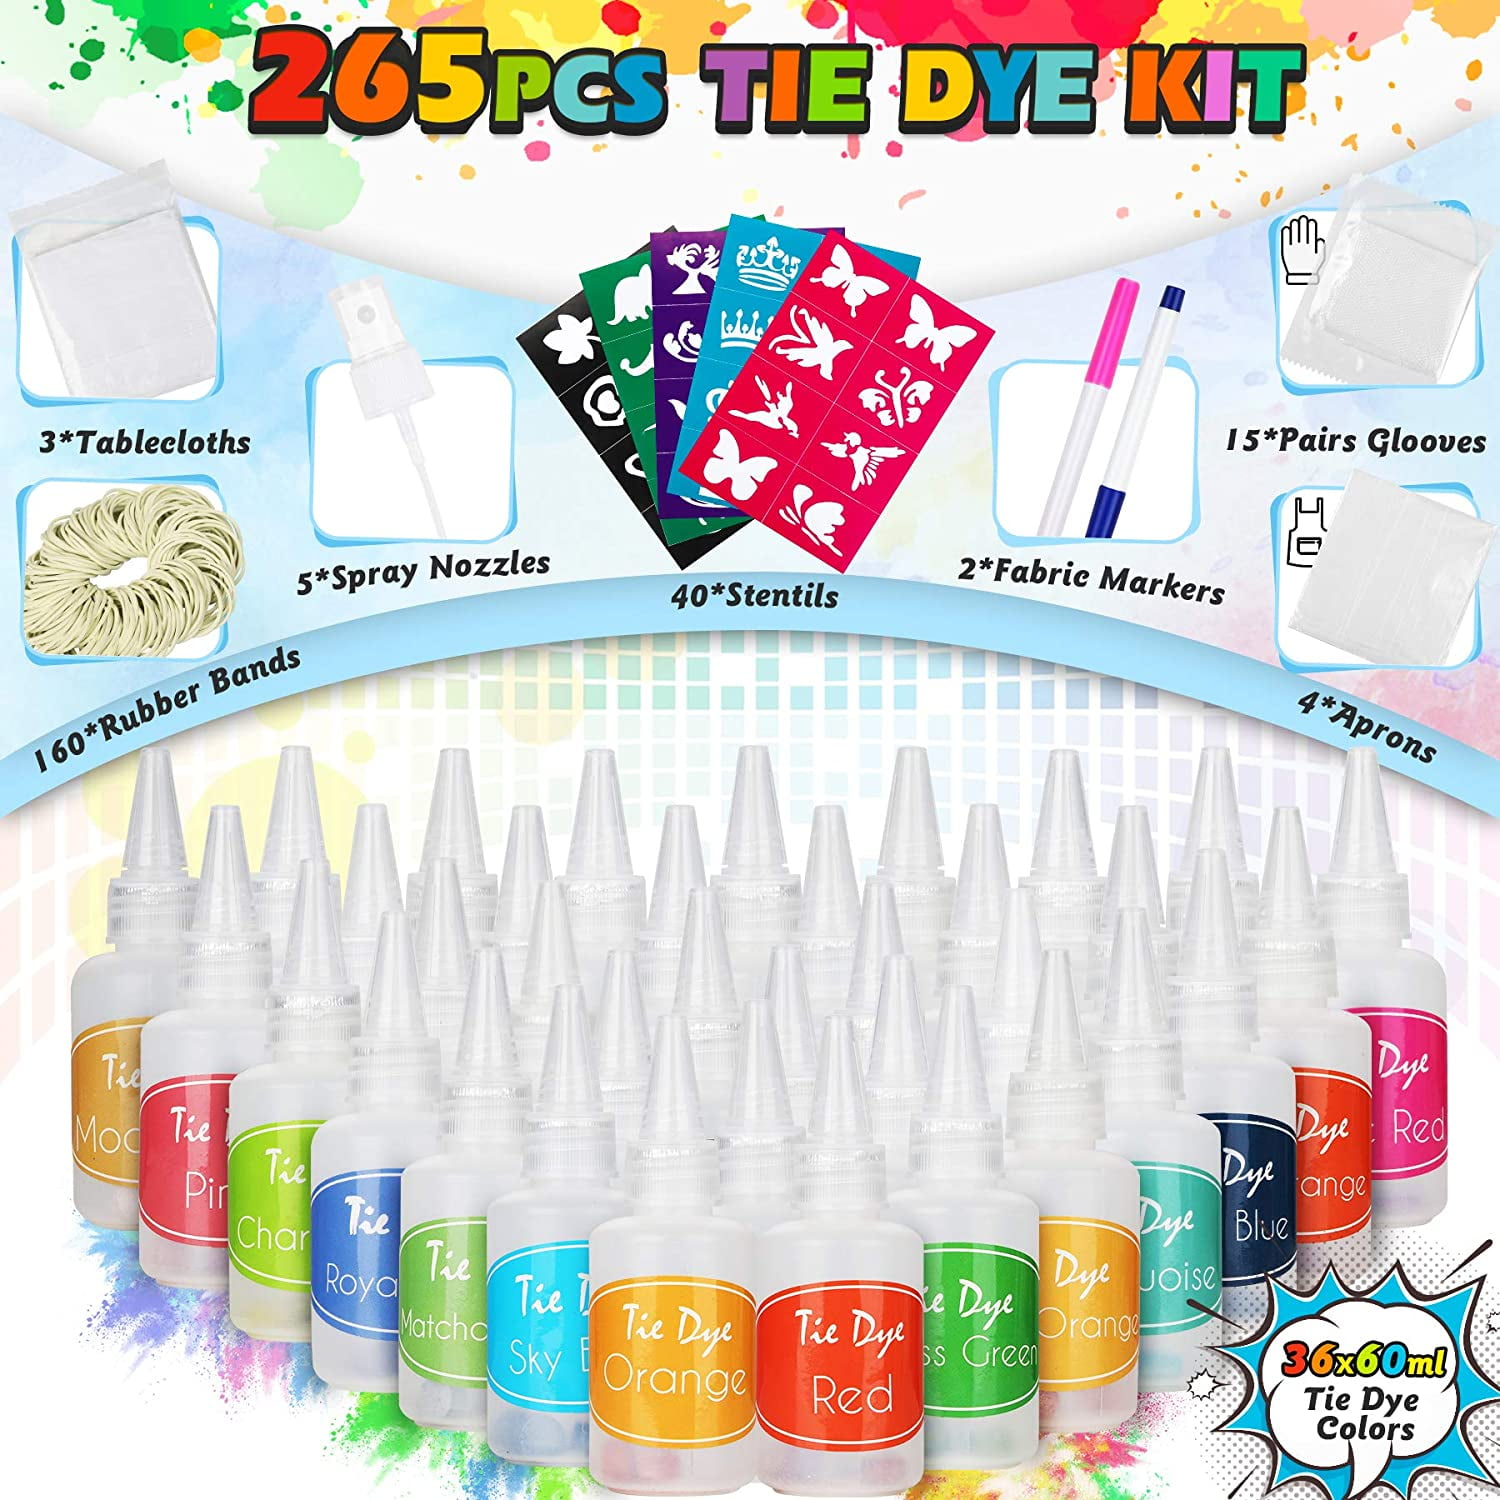  Tie Dye Kit for Kids Adults - Arts and Crafts Toy for Girls &  Boys Ages 6-12 - Fabric Tye Dye Craft Kits 20 Colors, Birthday Christmas  Gifts for Kids 3 4 5 6 7 8 9 10+